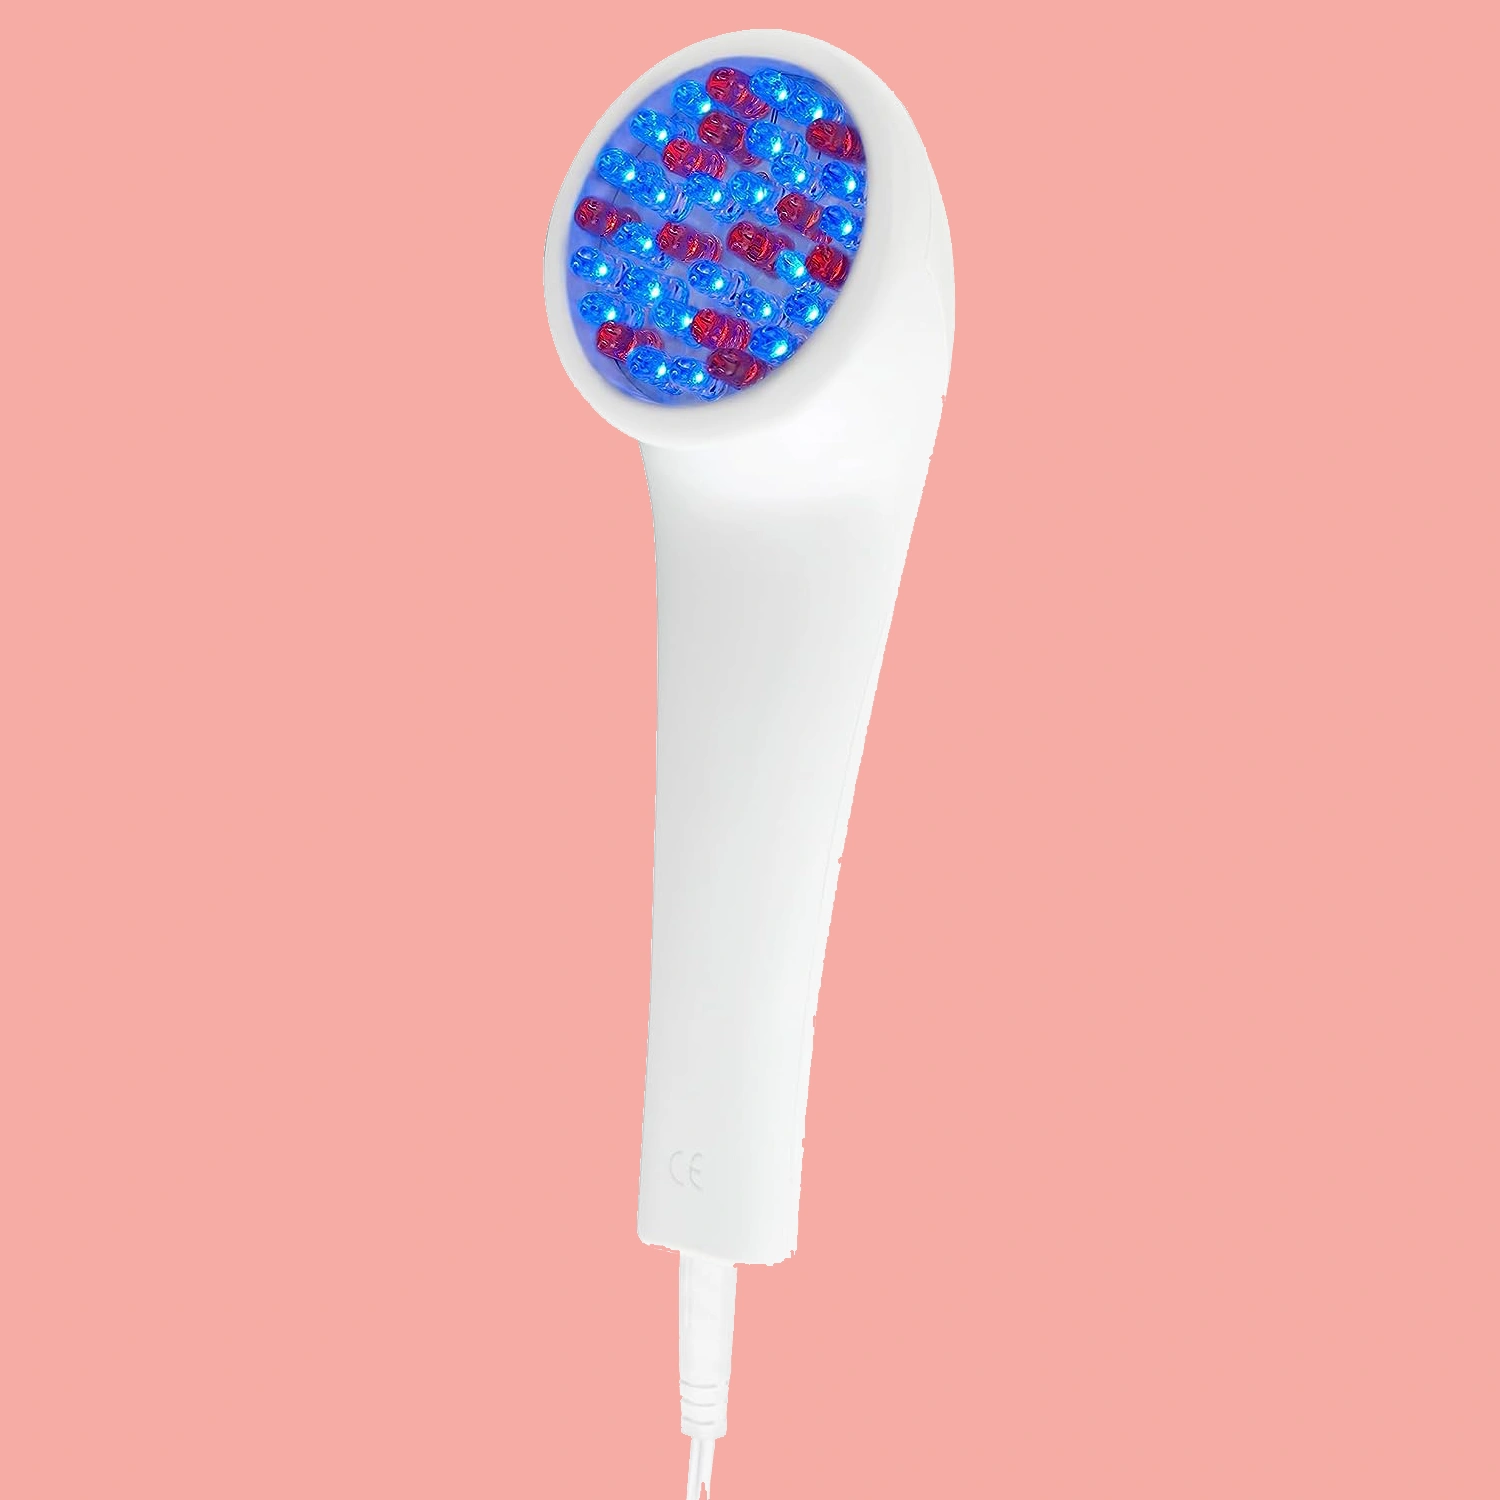 LightStim for Acne LED device shown on a pink background.